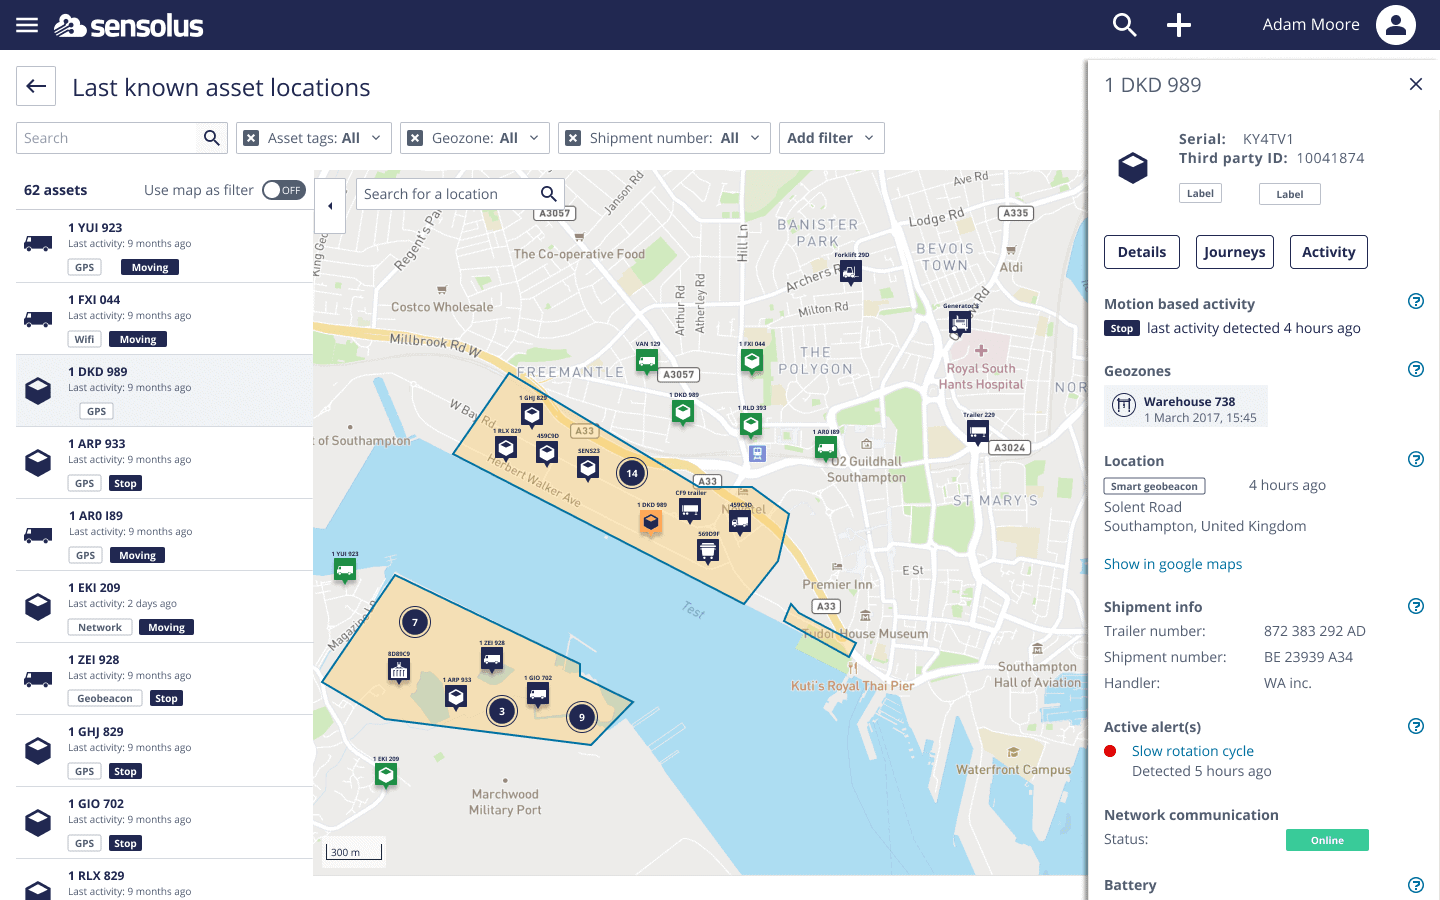 Asset tracking allows you to always know where your assets are thanks to the Sensolus platform